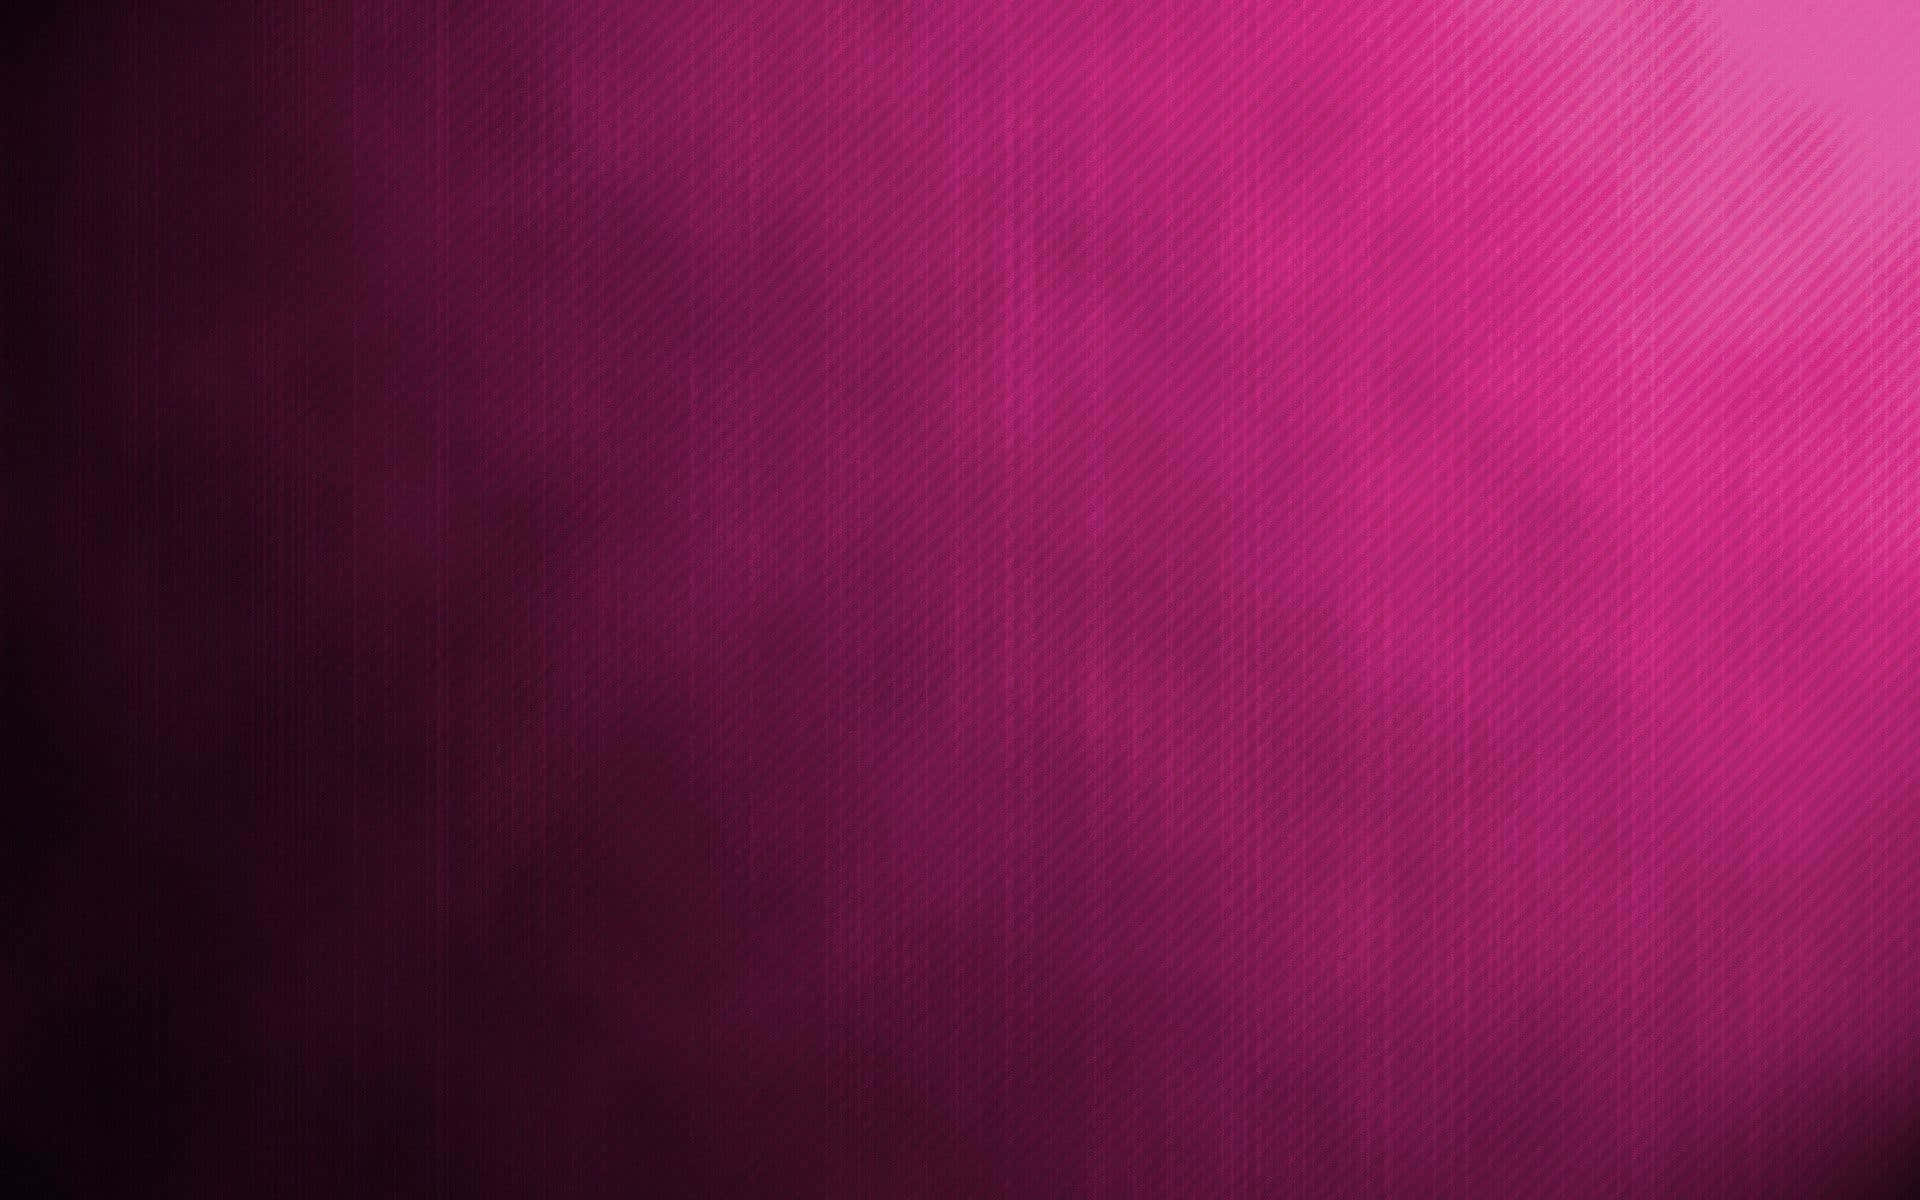 A vibrant pink texture background!